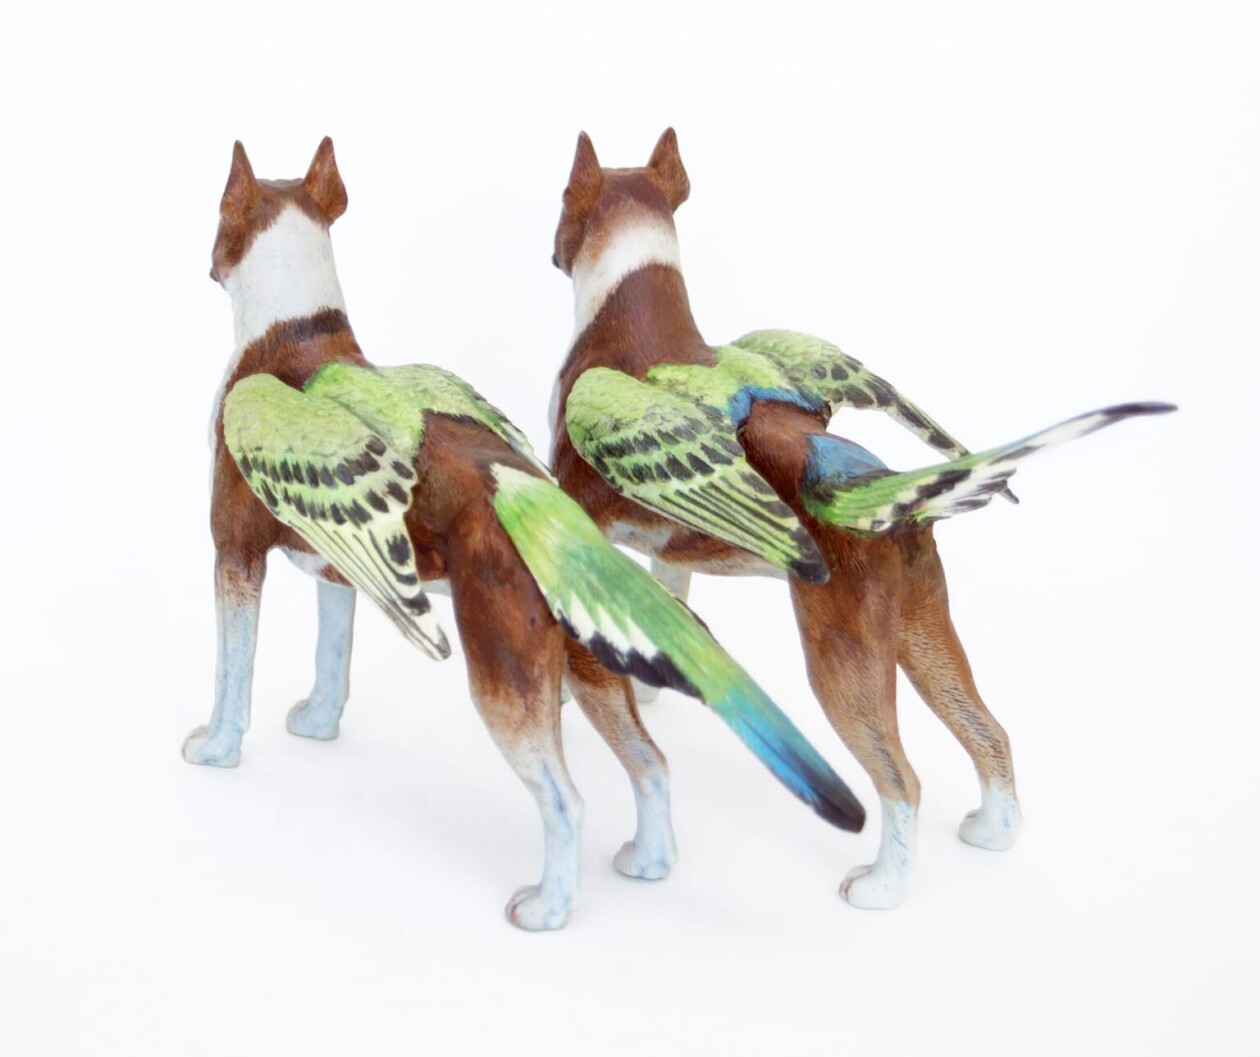 Debra Broz Brings To Life Uncanny Beings By Creating Unexpected Mashups Between Animals, Plants, And Humans (4)